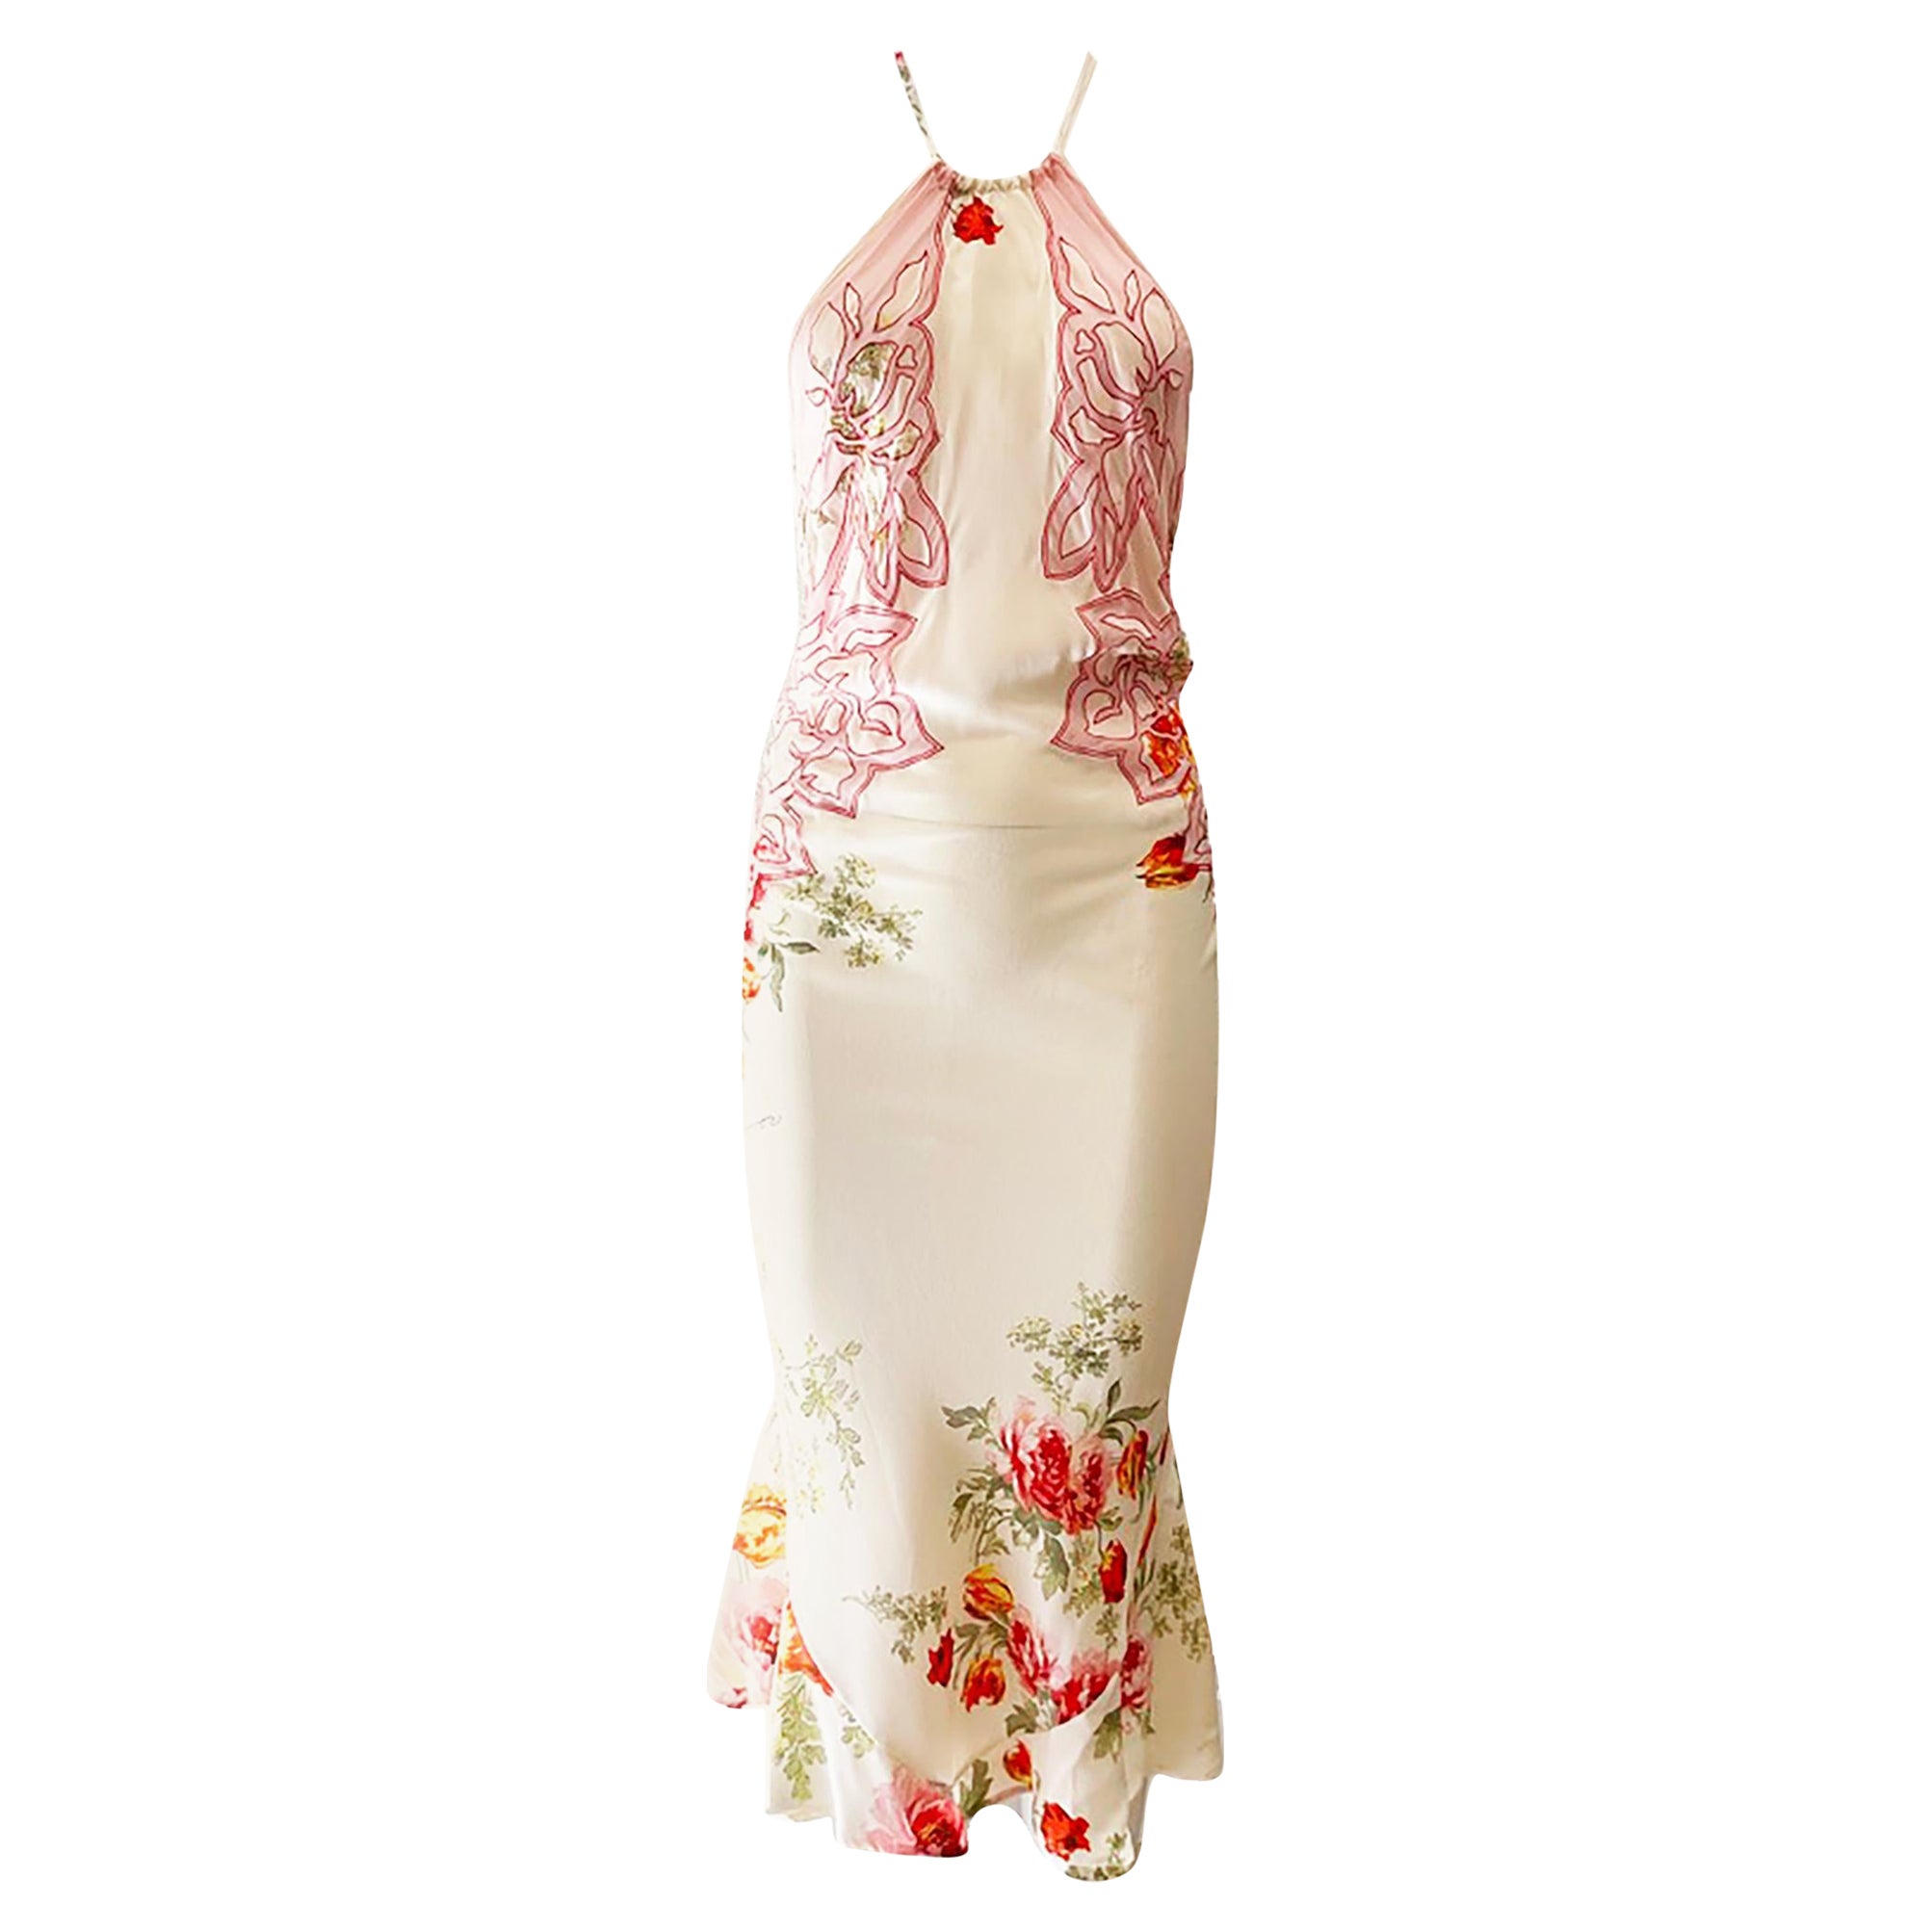 S/S 2002 Roberto Cavalli Sheer Floral Silk Backless Dress For Sale